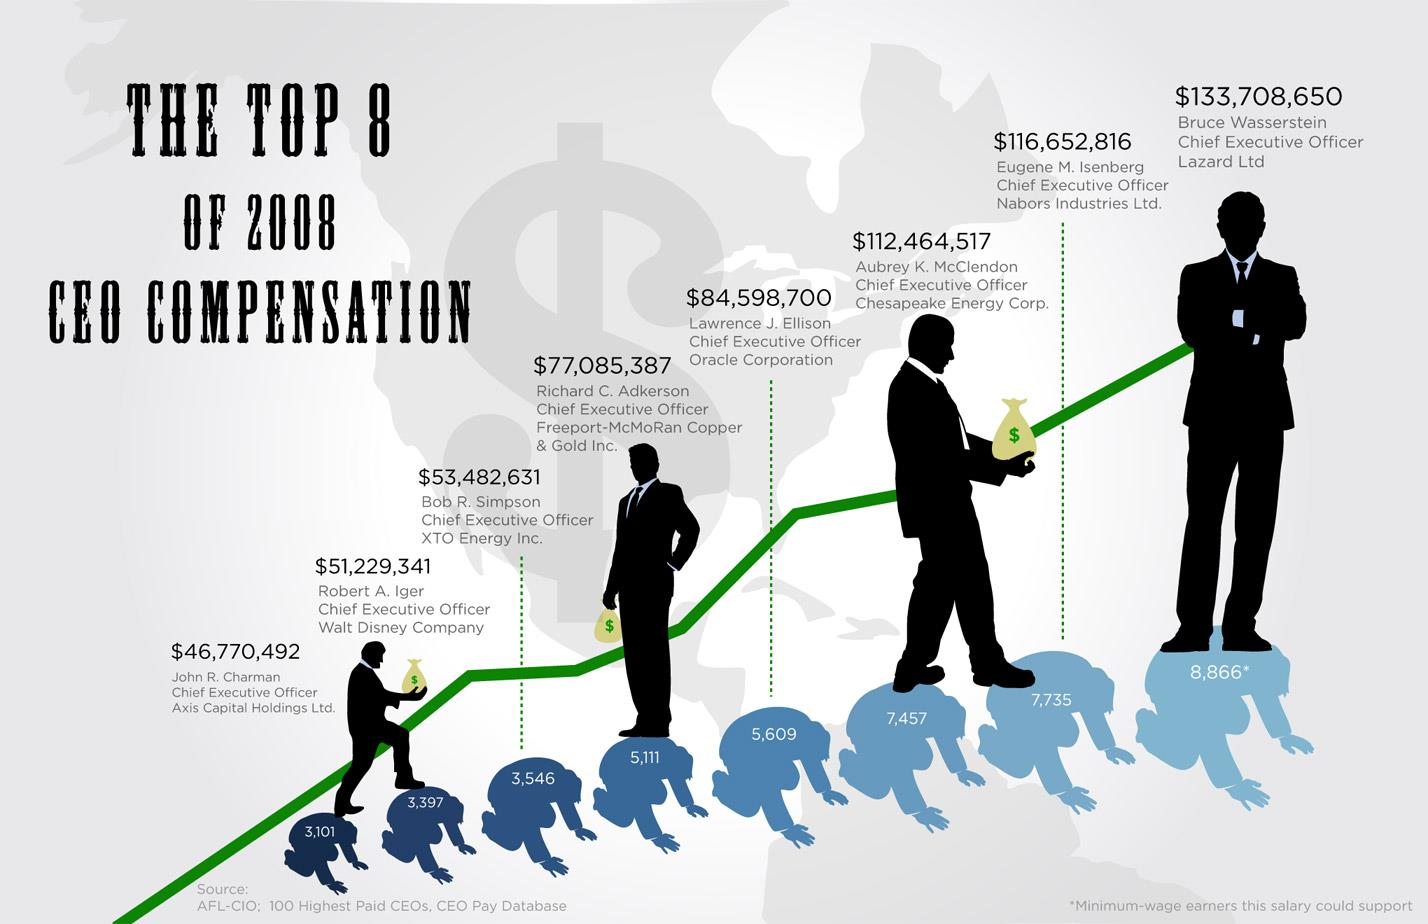 The top 8 of 2008 CEO COMPENSATION